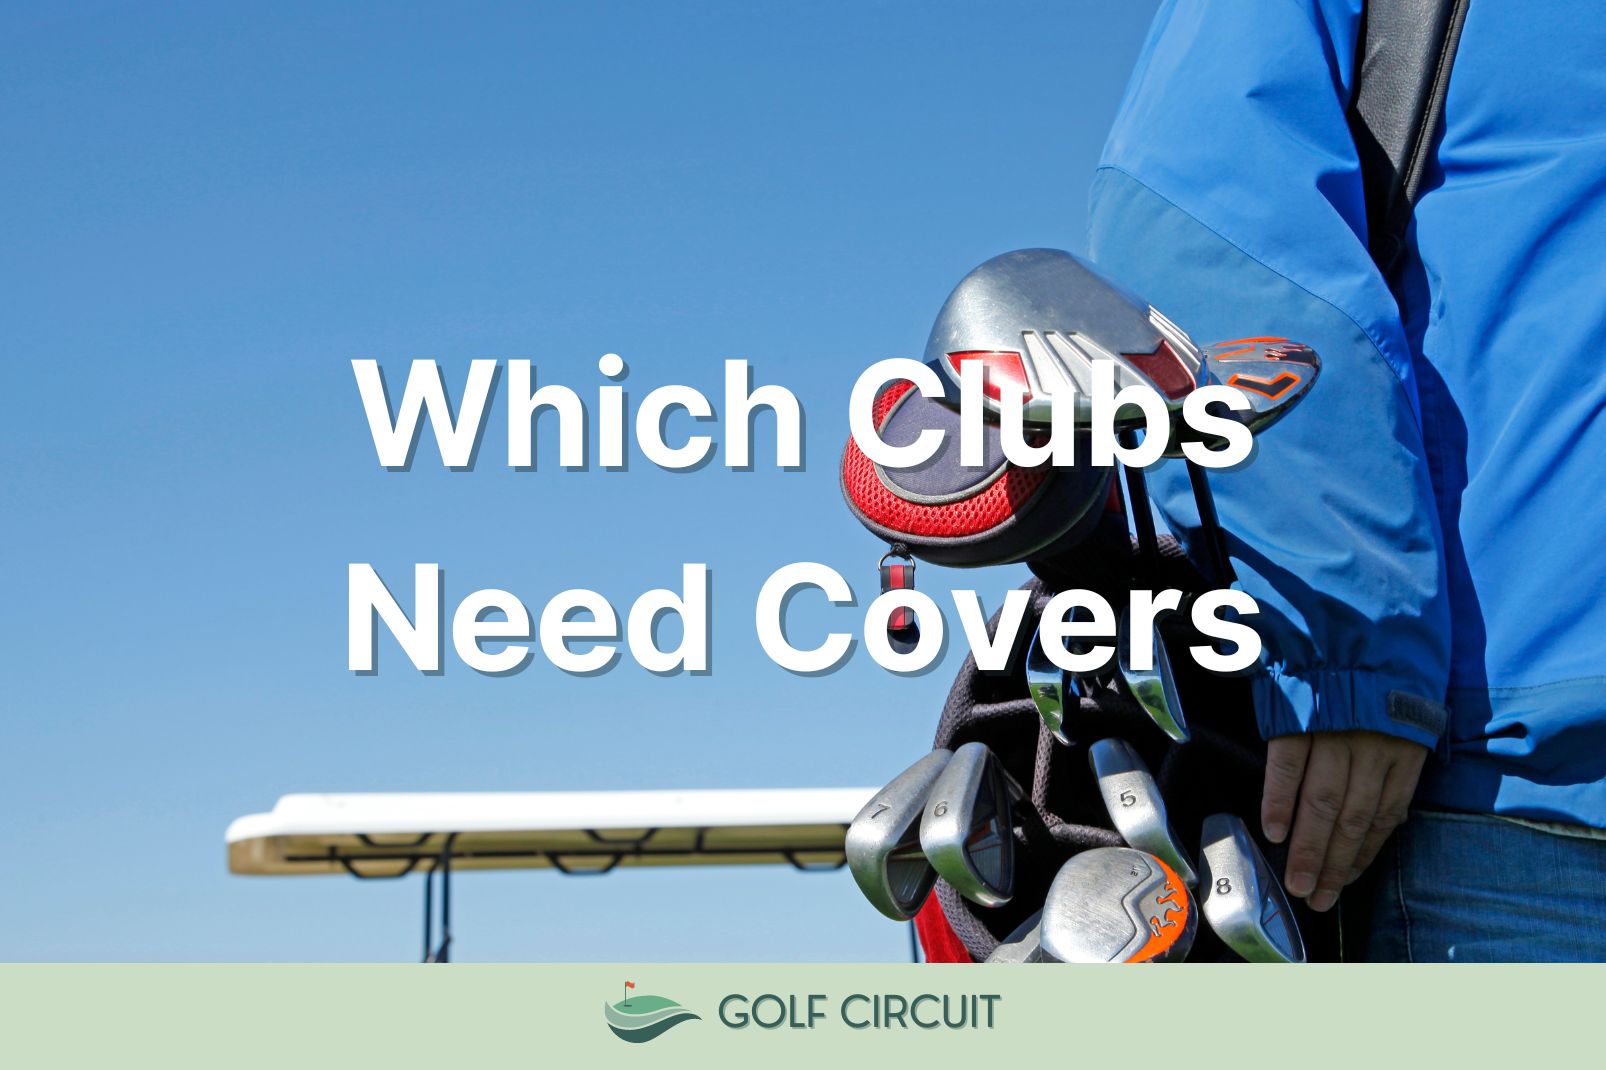 Which Golf Clubs Need Covers?